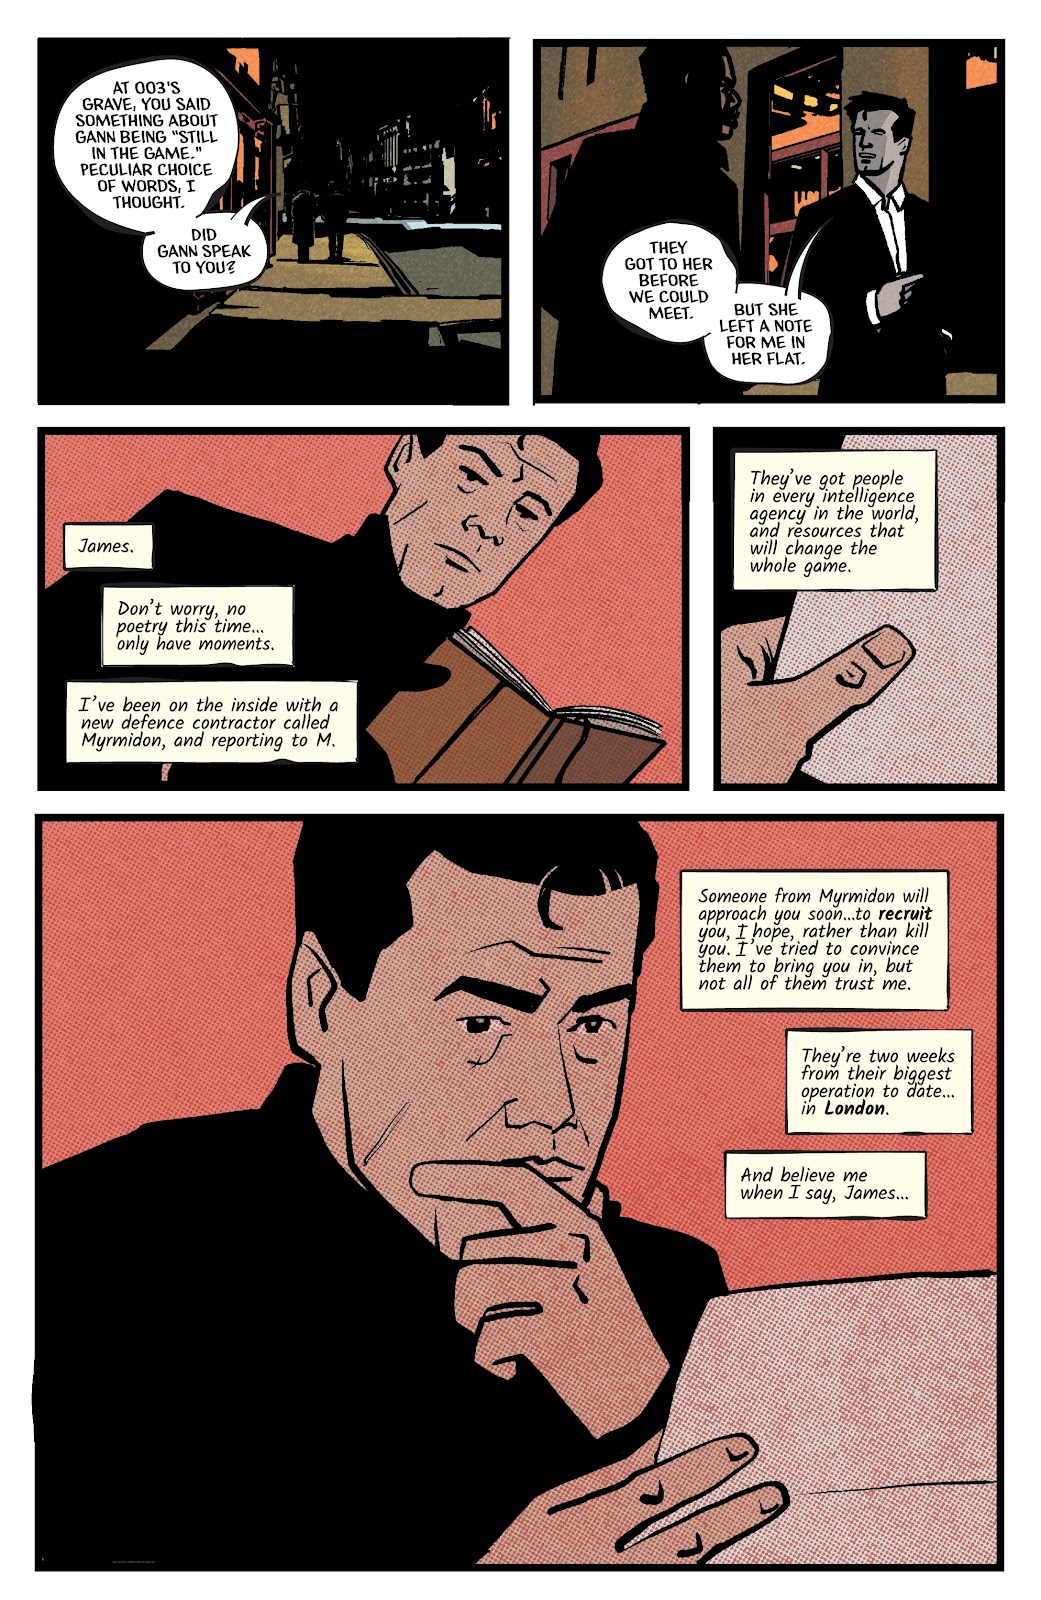 James Bond: 007 (2022) issue 2 - Page 17